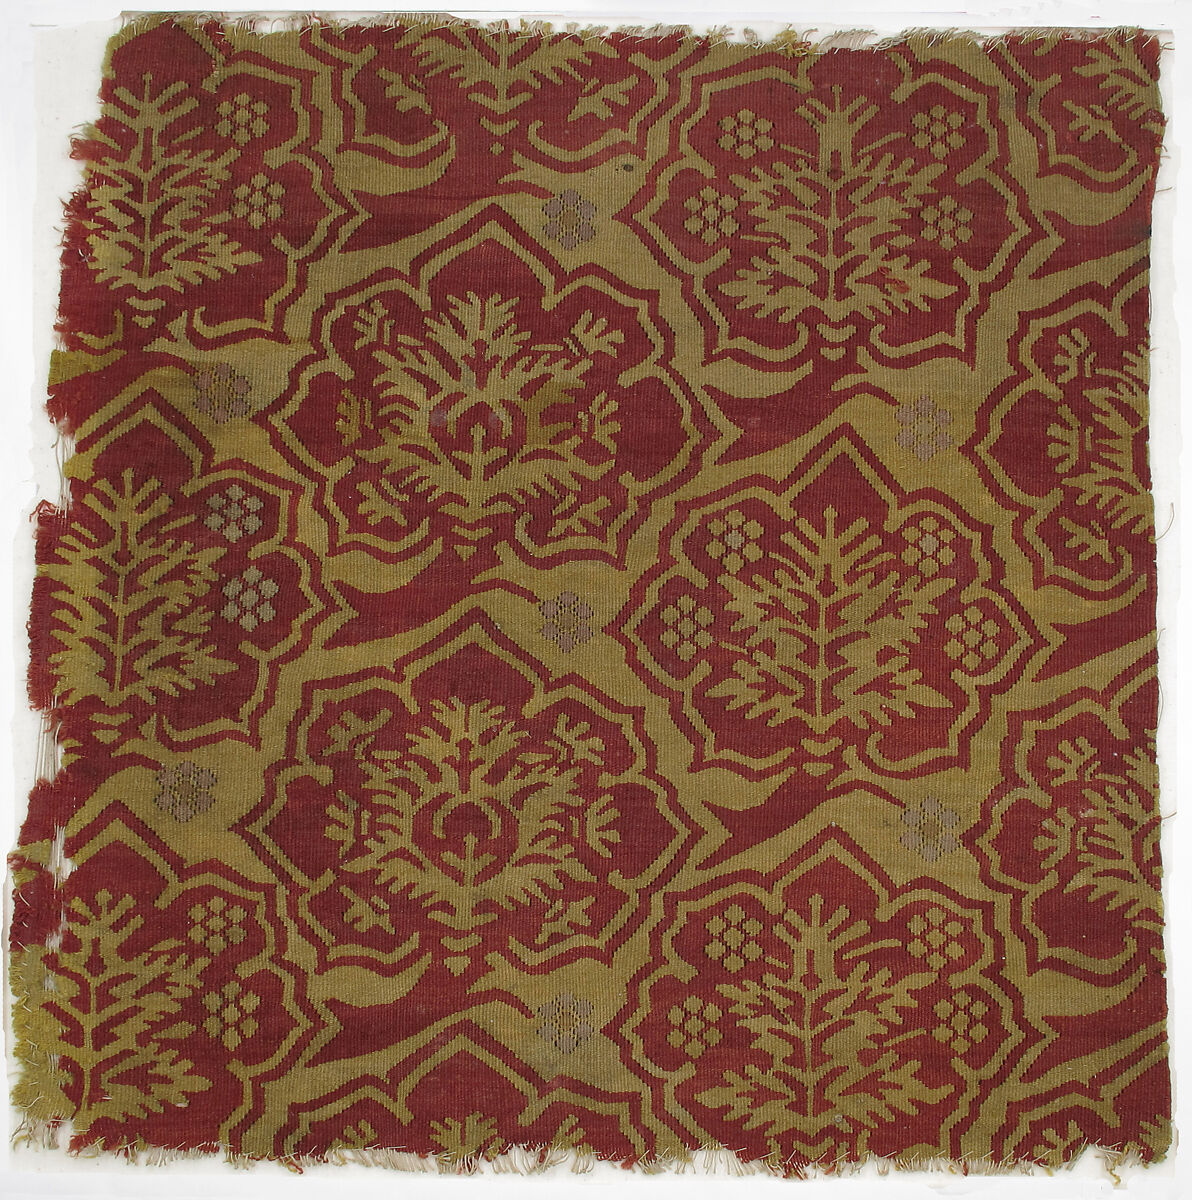 Fragment with a Simulated Silk Textile Pattern, Linen warp, wool wefts, Upper Rhenish 